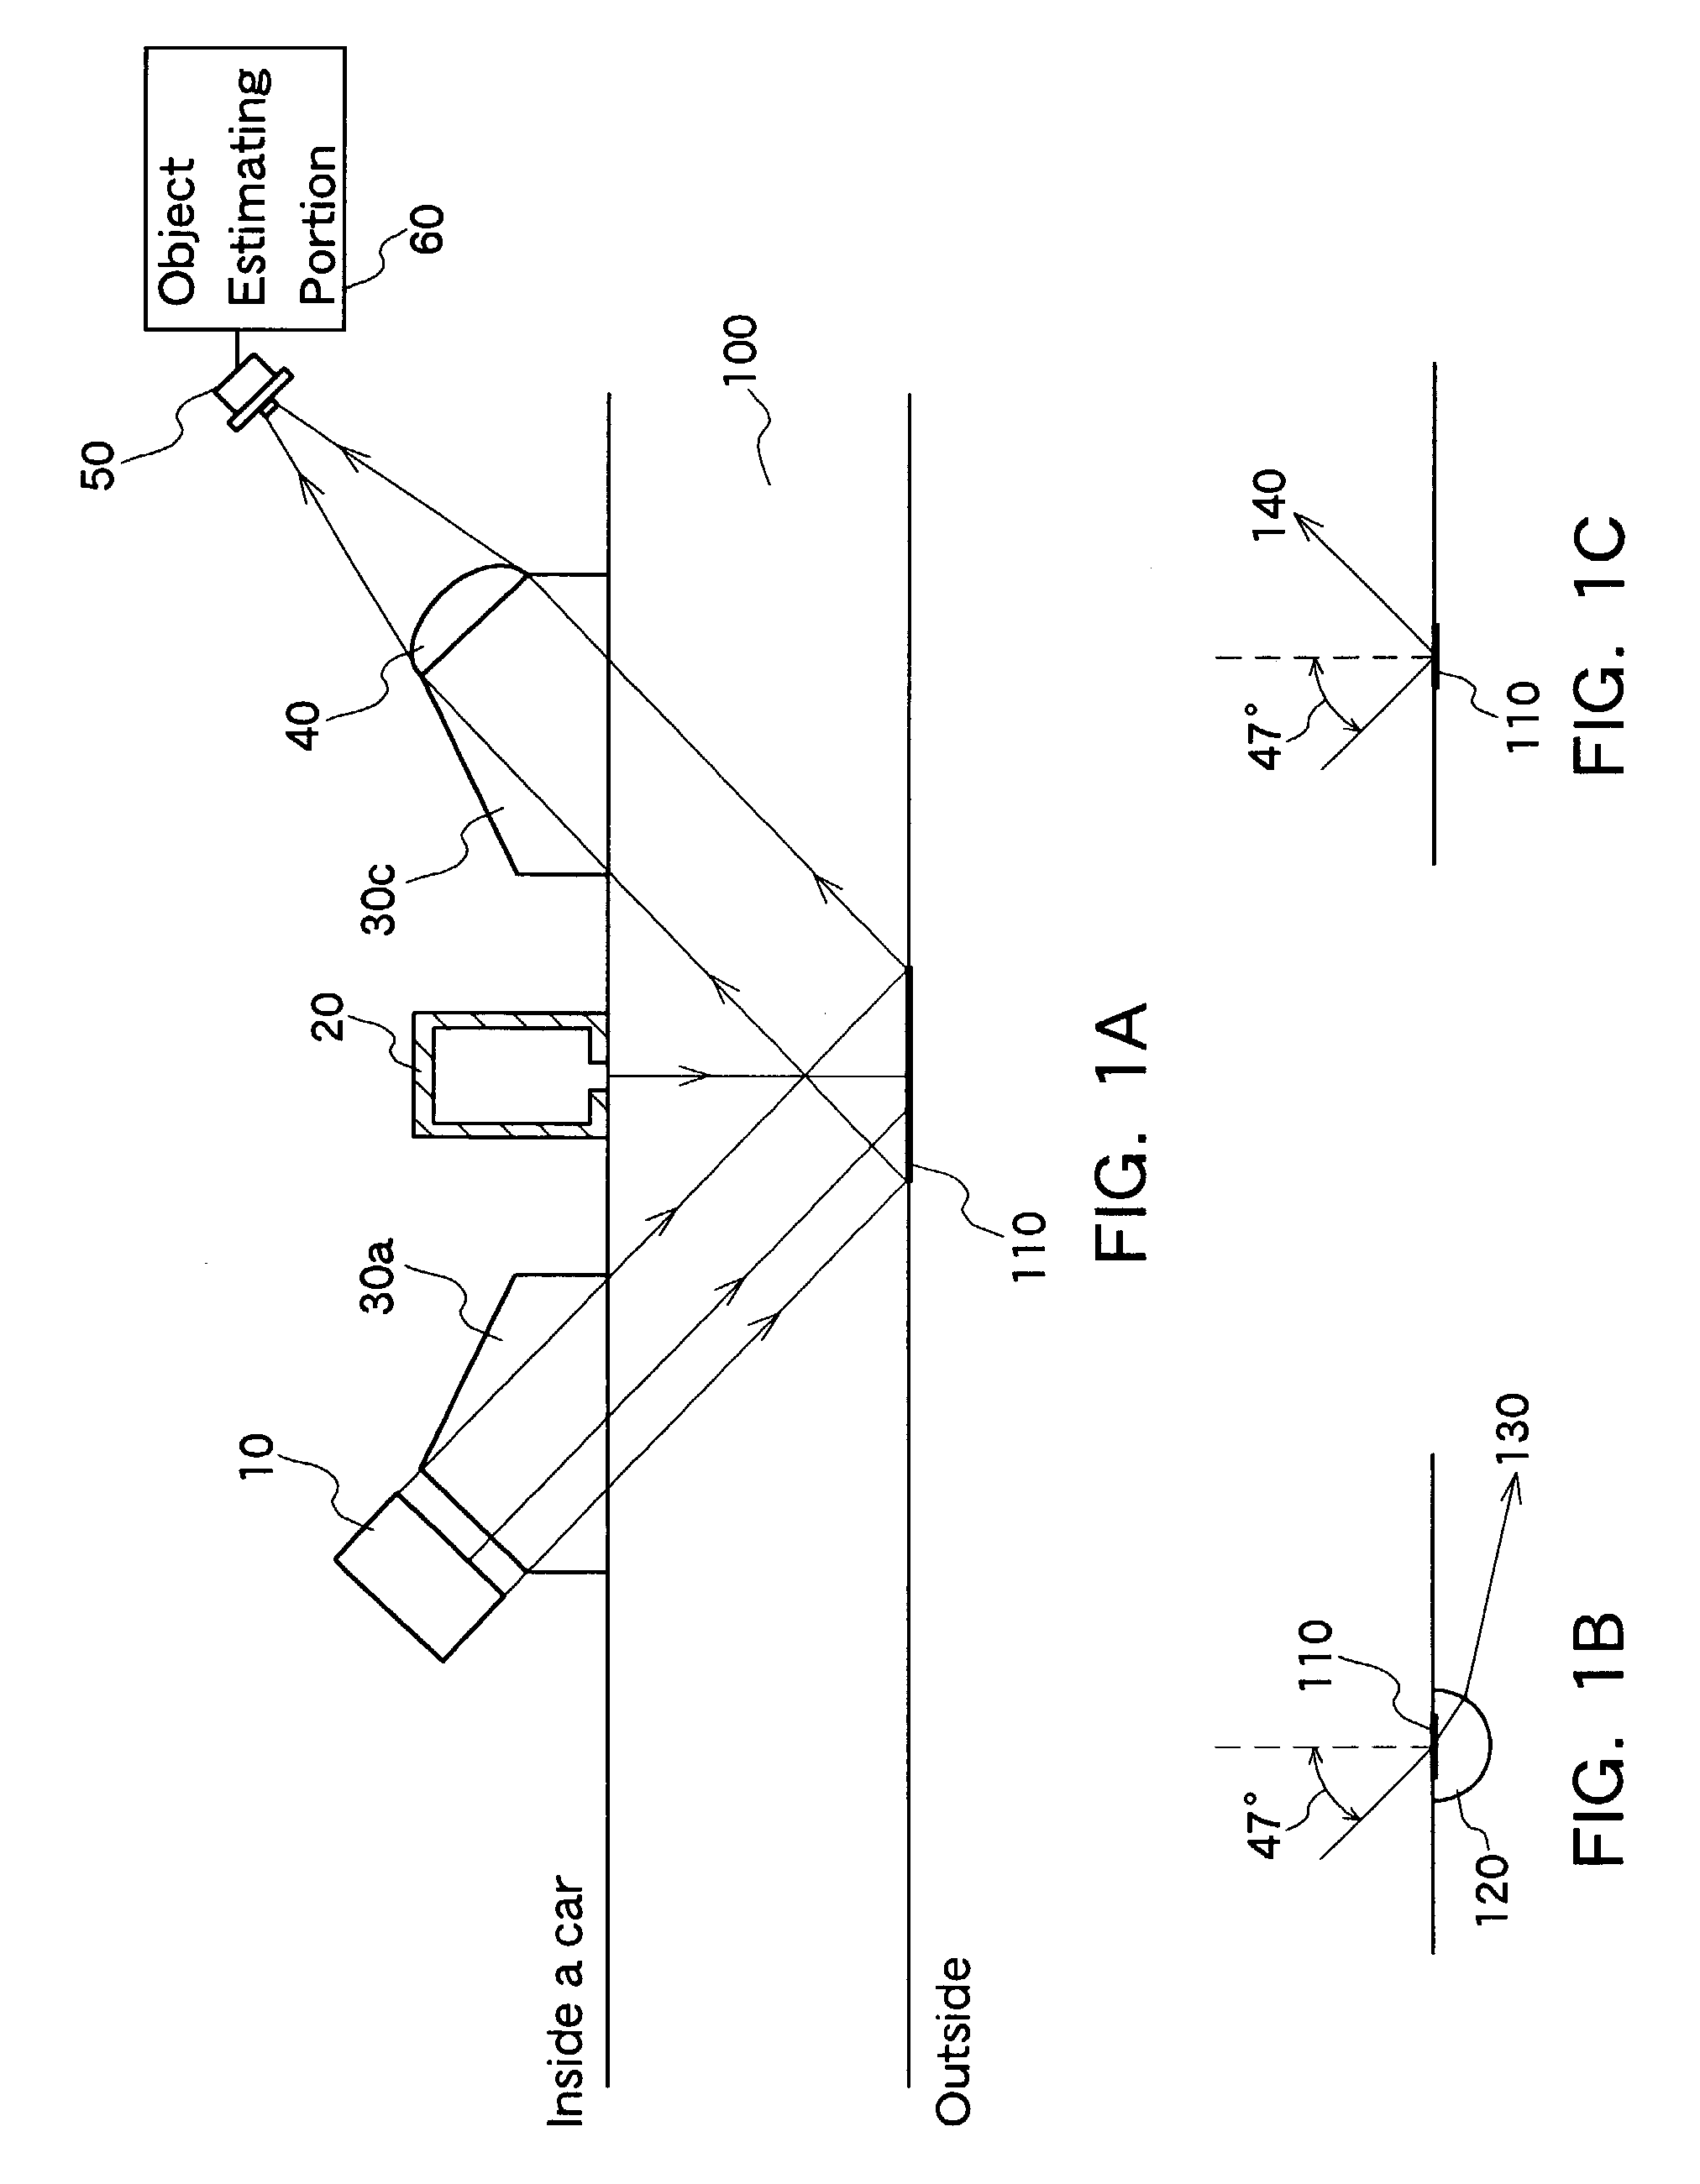 Deposit detector and controller using the detector